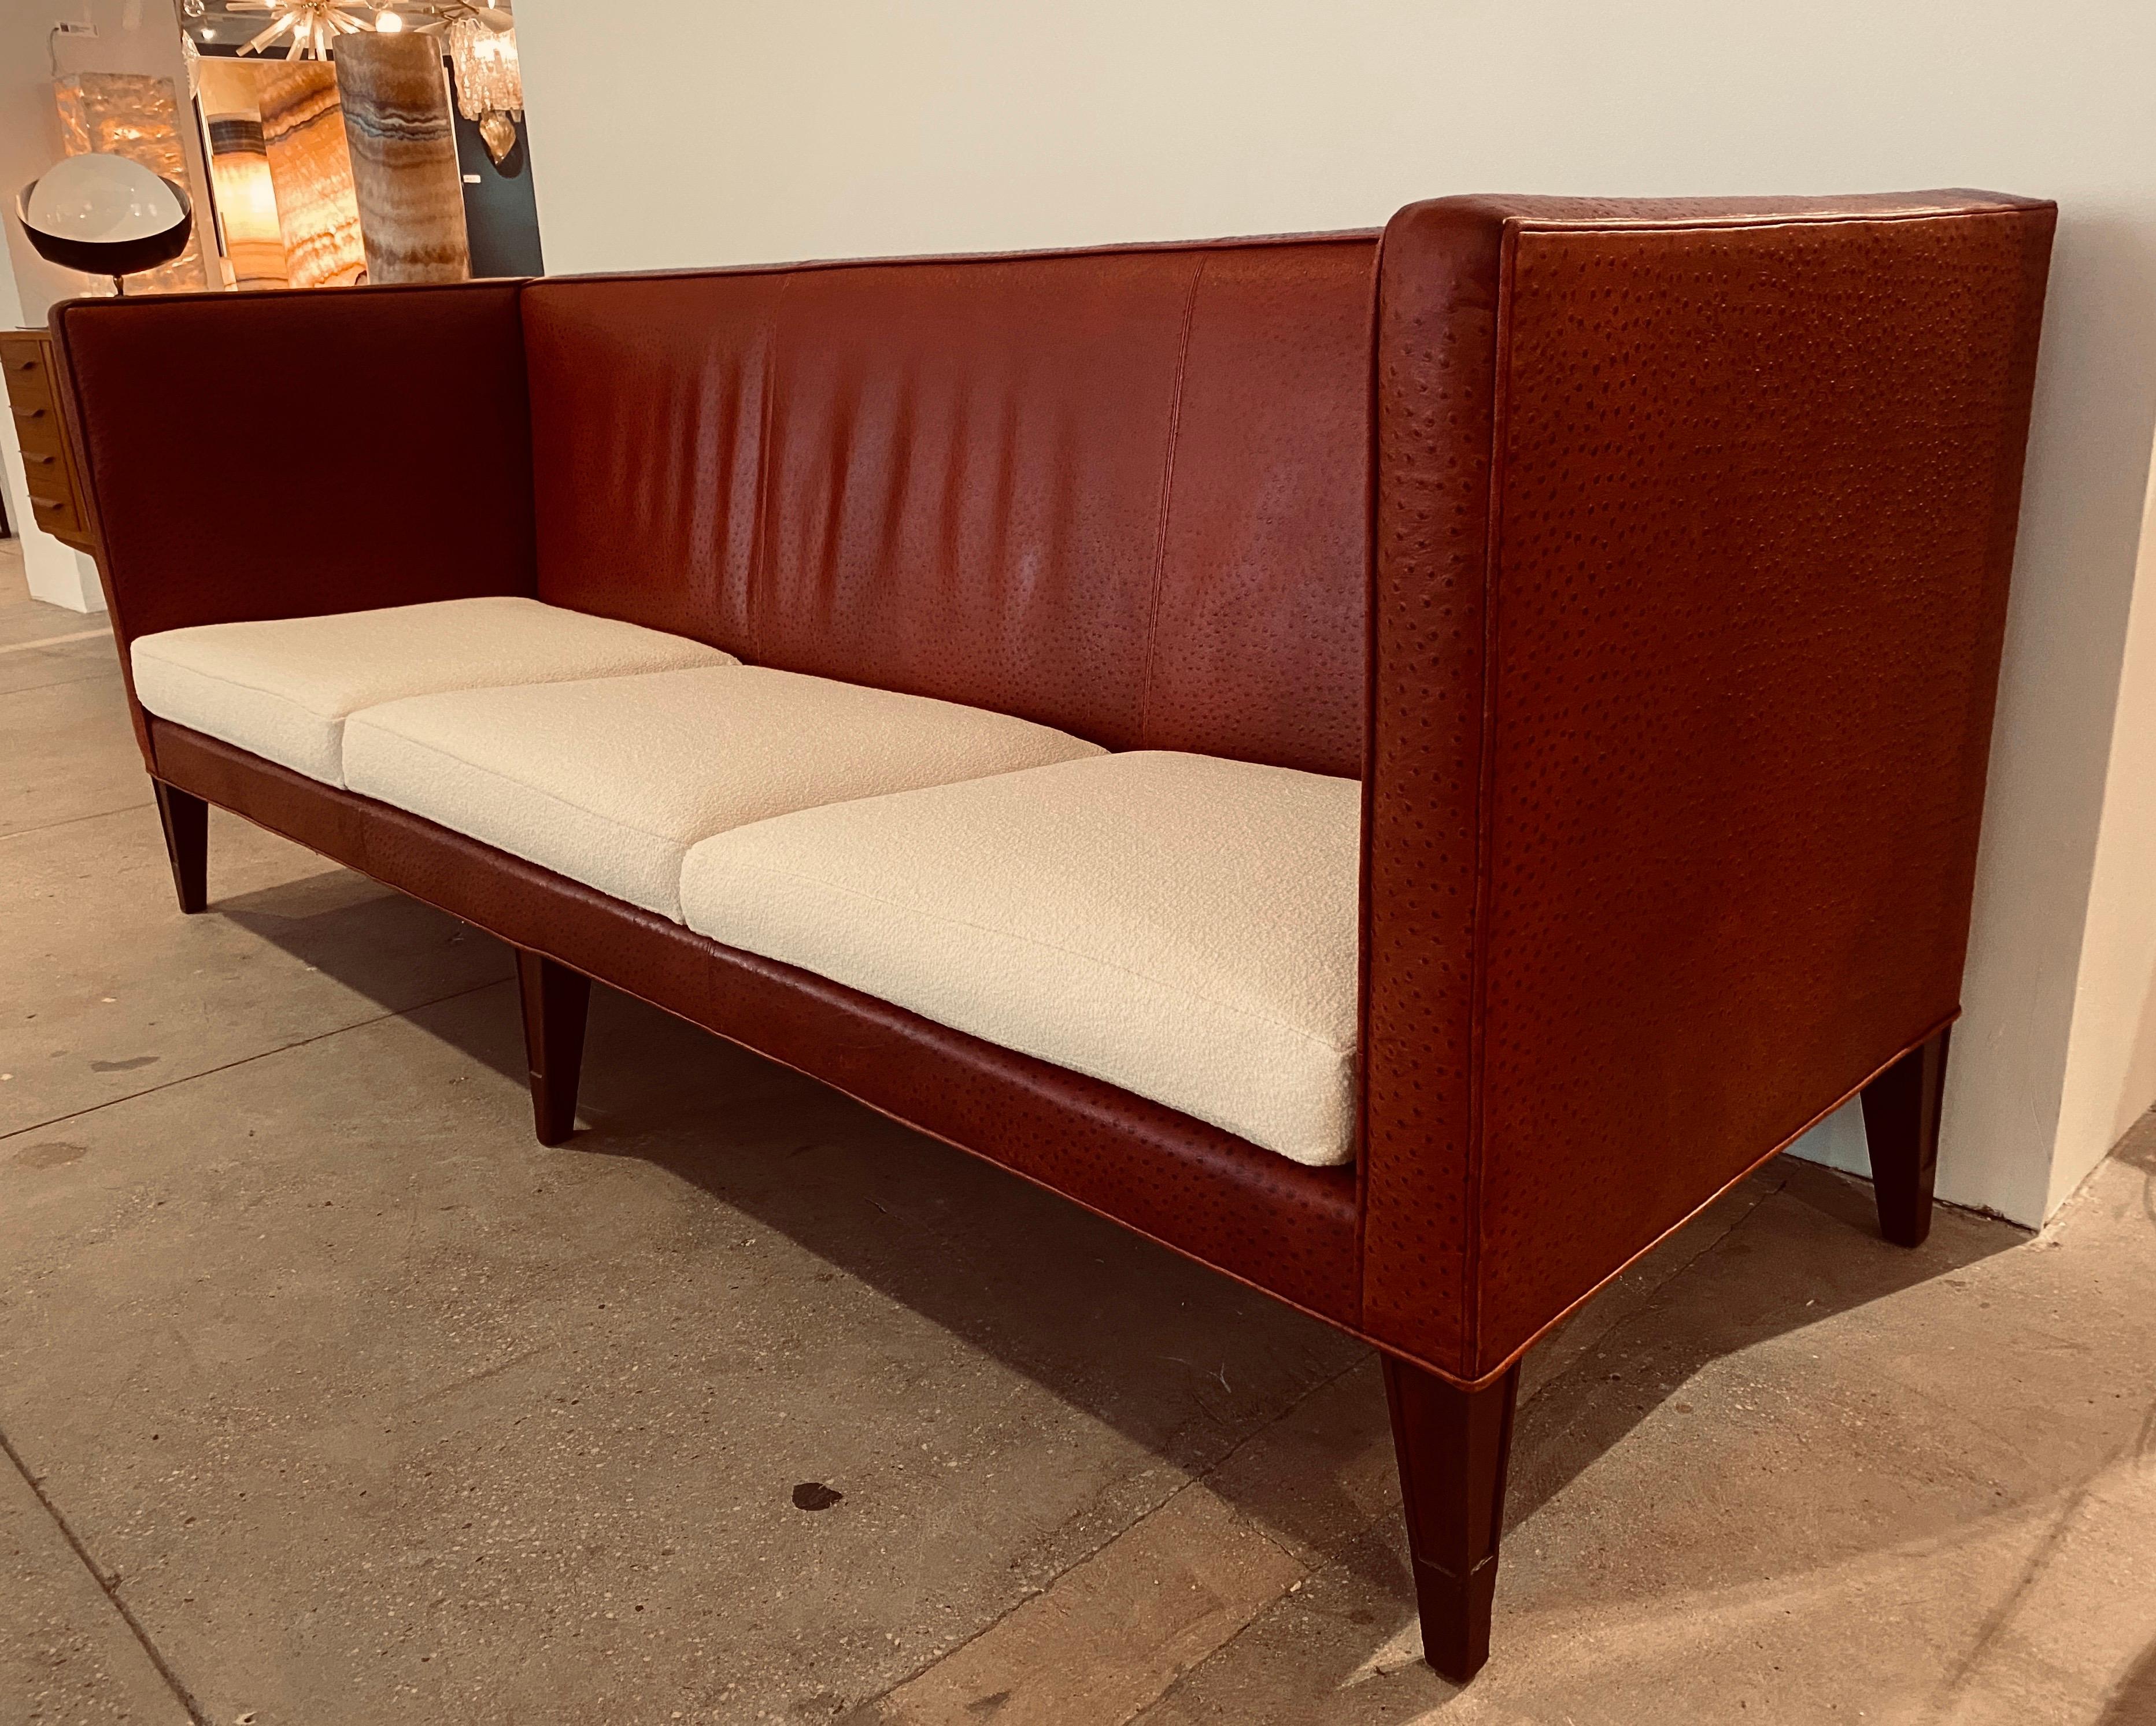 Philippe Starck Redwood Room Clift Hotel Leather Sofa 9